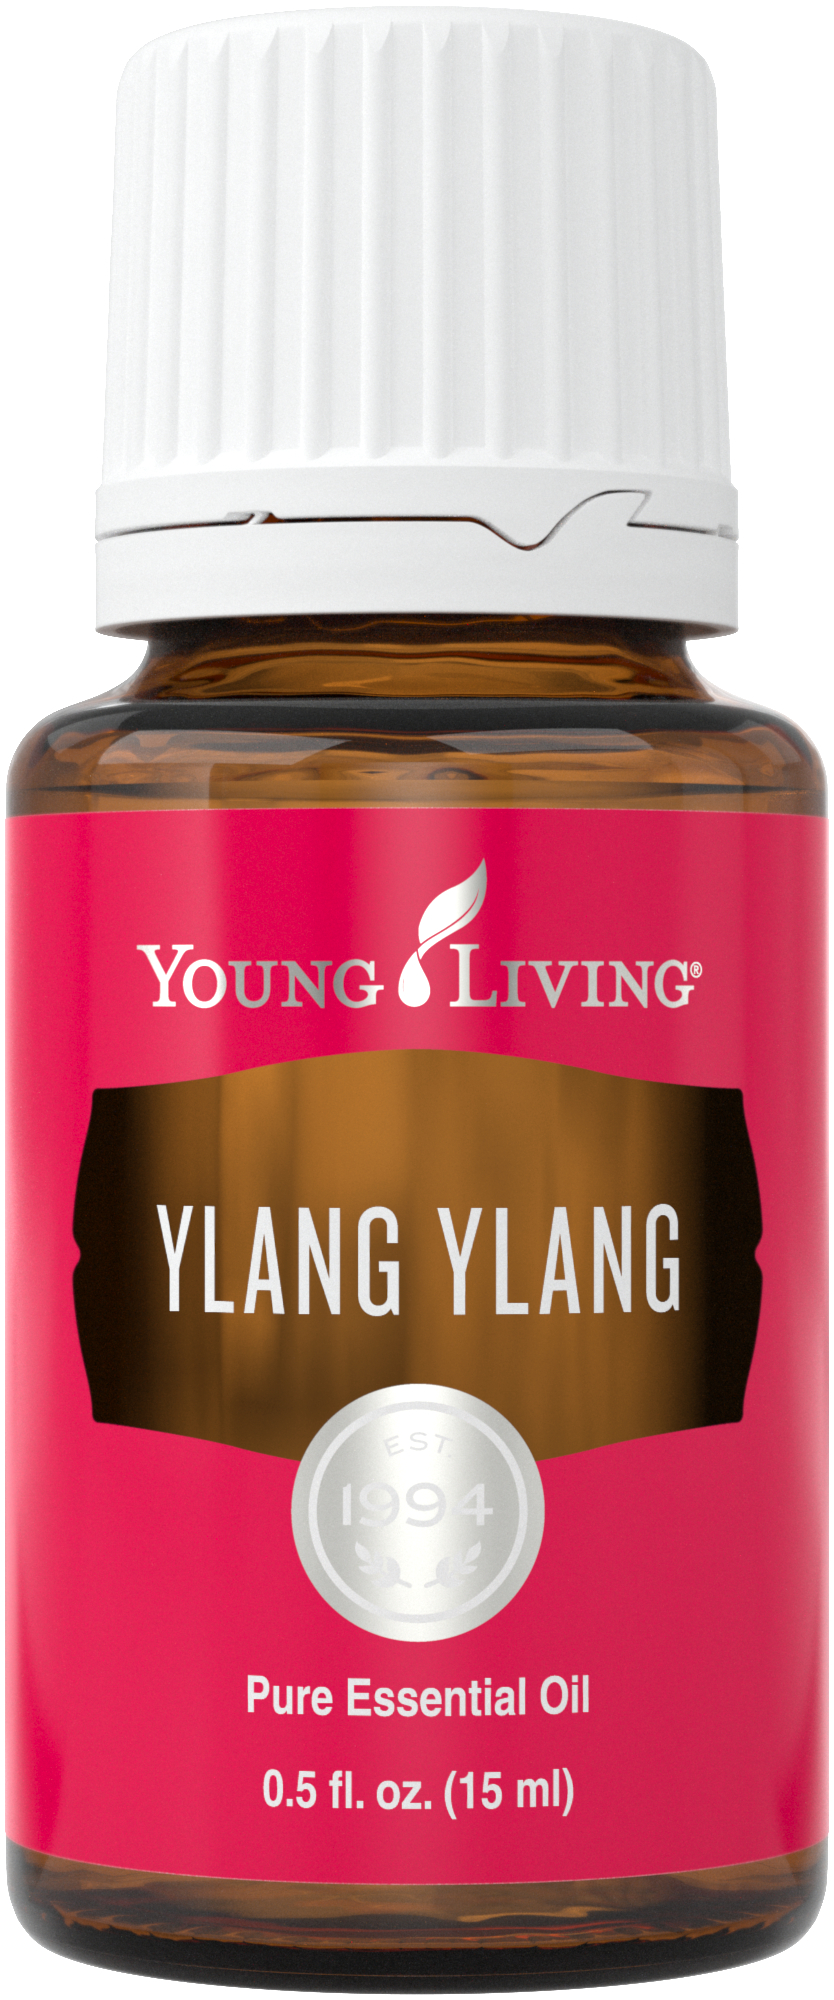 Ylang Ylang Essential Oil - young living essential oils